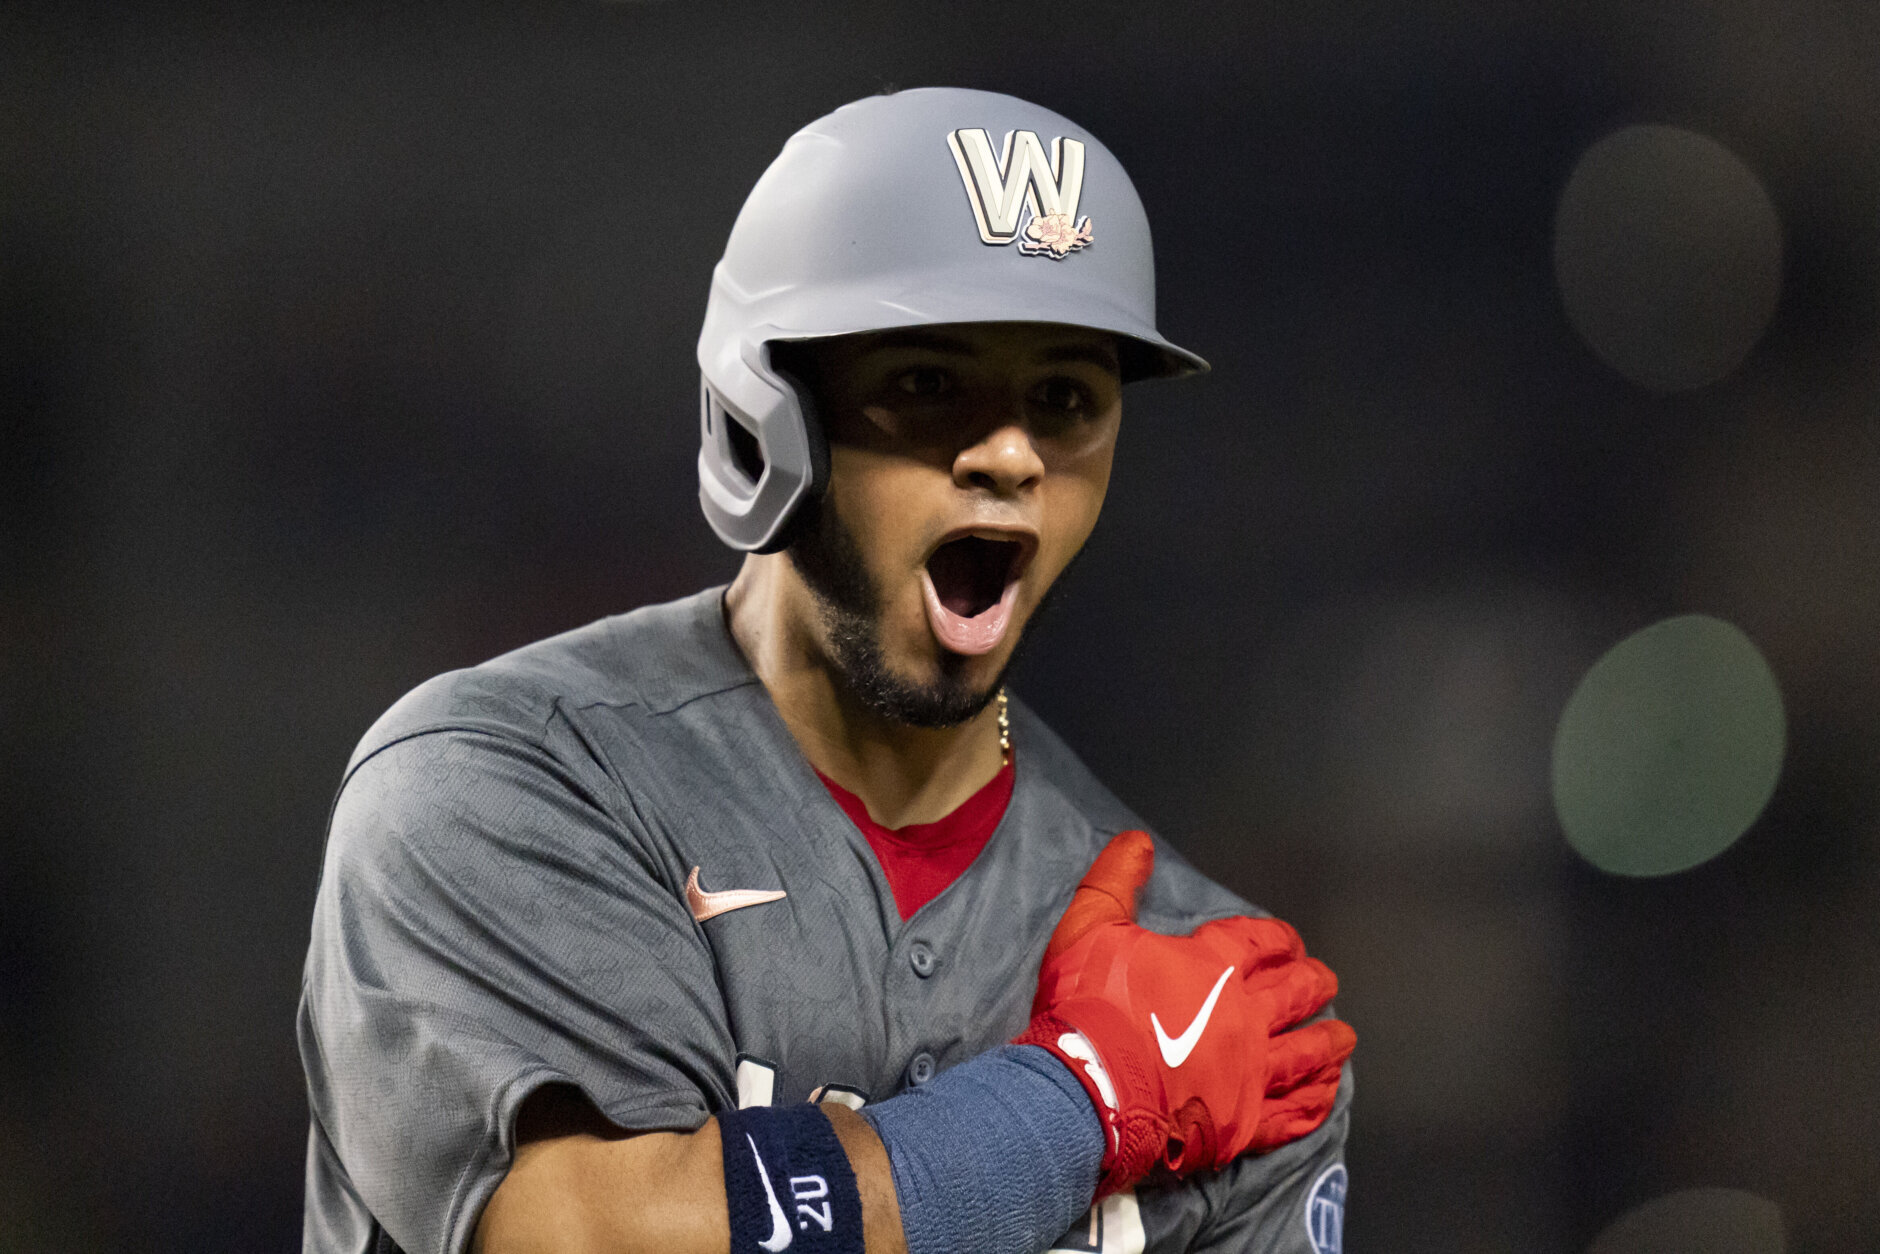 Keibert Ruiz homers on first pitch of 9th inning to lift Nationals past  Athletics, 3-2 - WTOP News